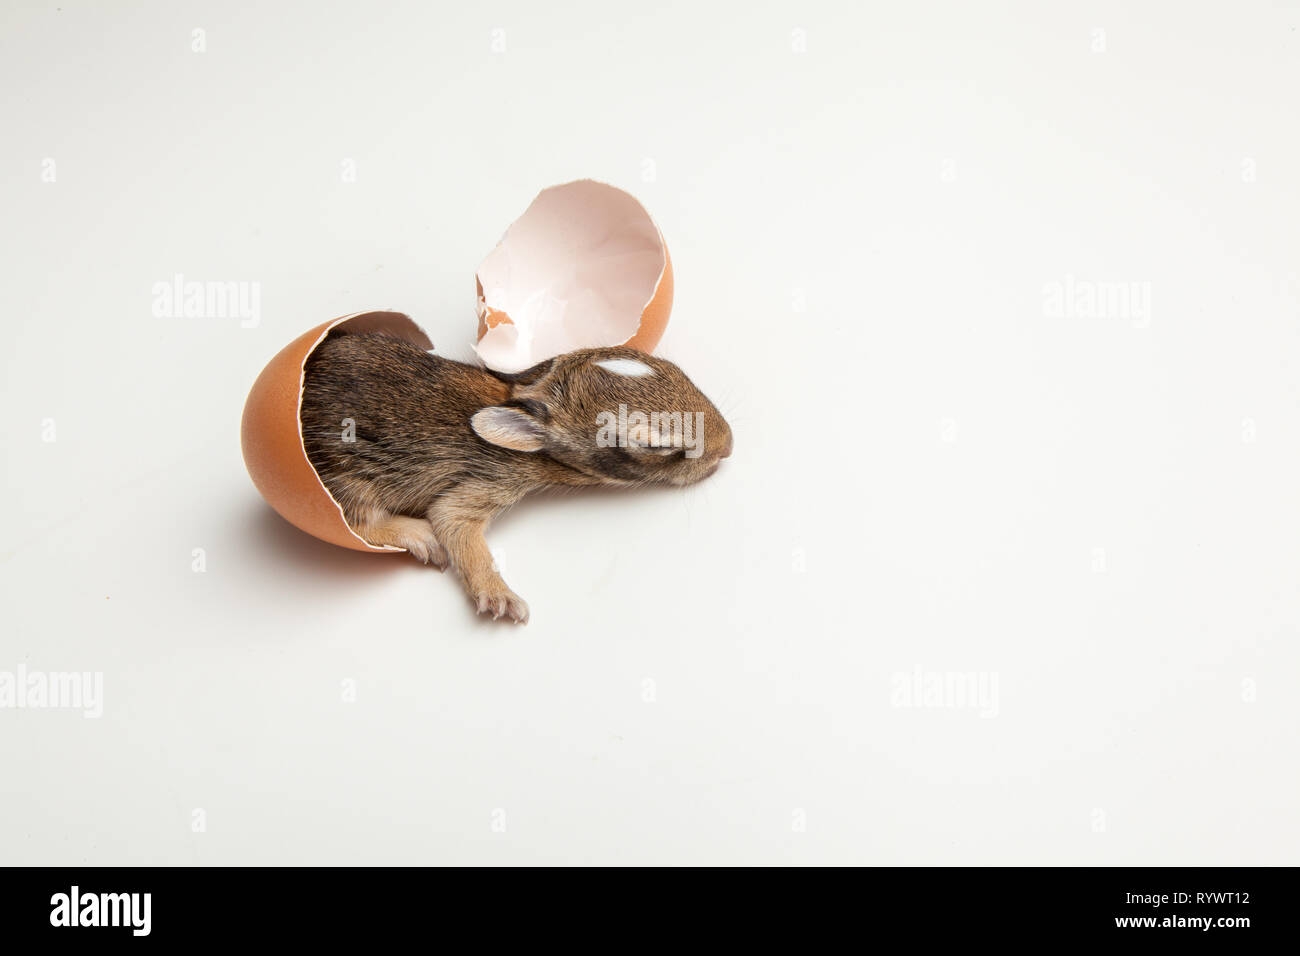 Concept image of a baby rabbit being hatched from an egg. Stock Photo